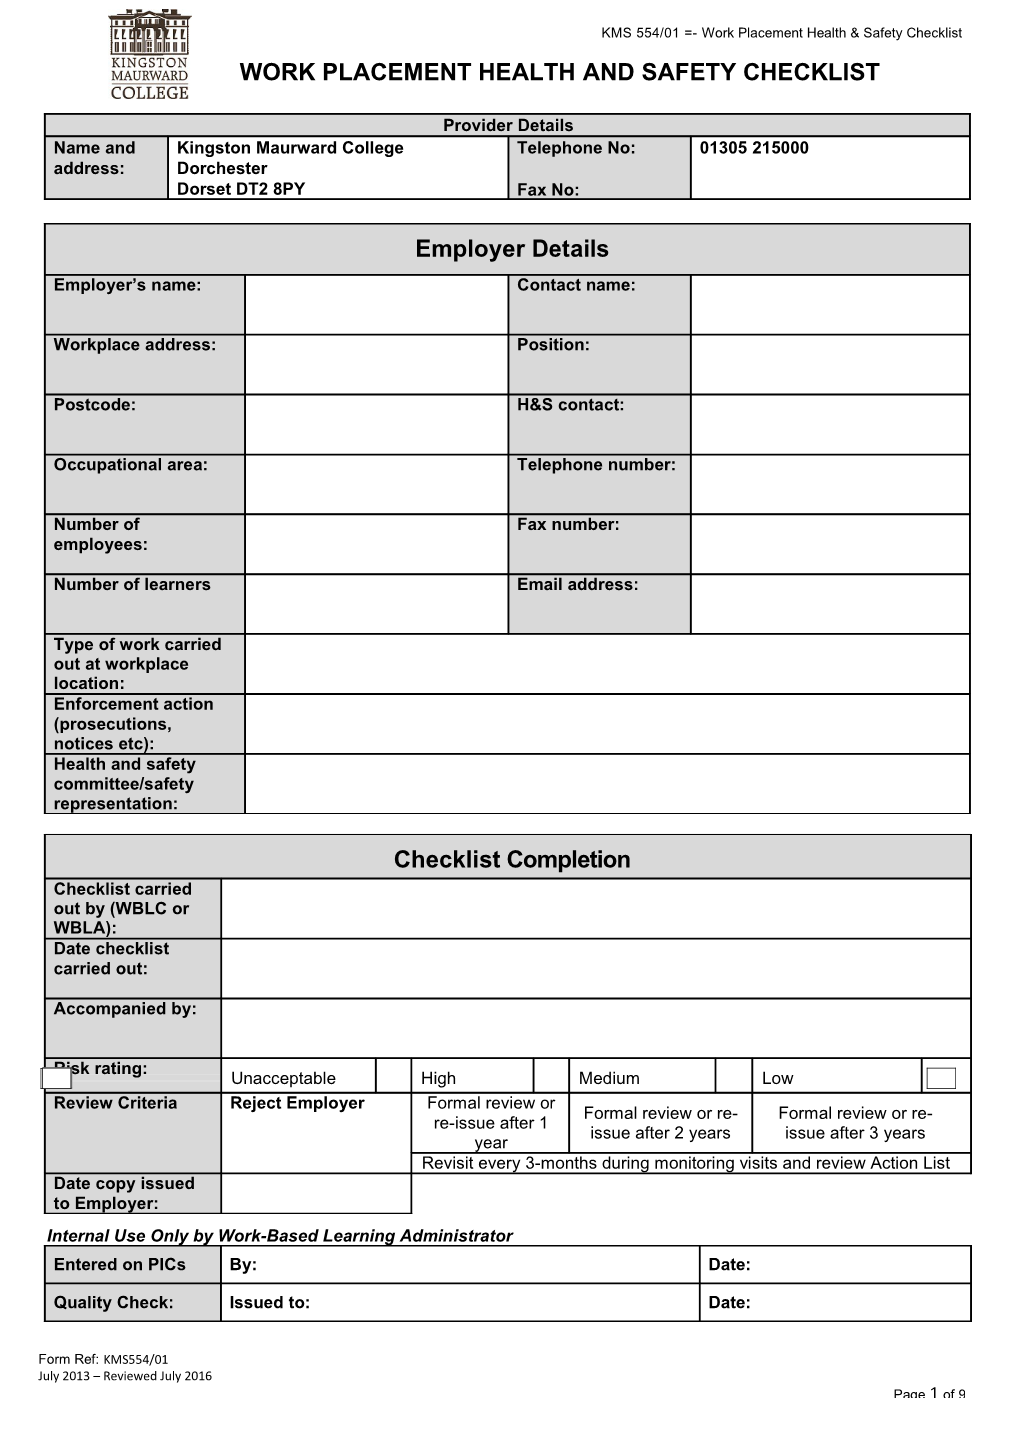 Work Placement Health and Safety Checklist